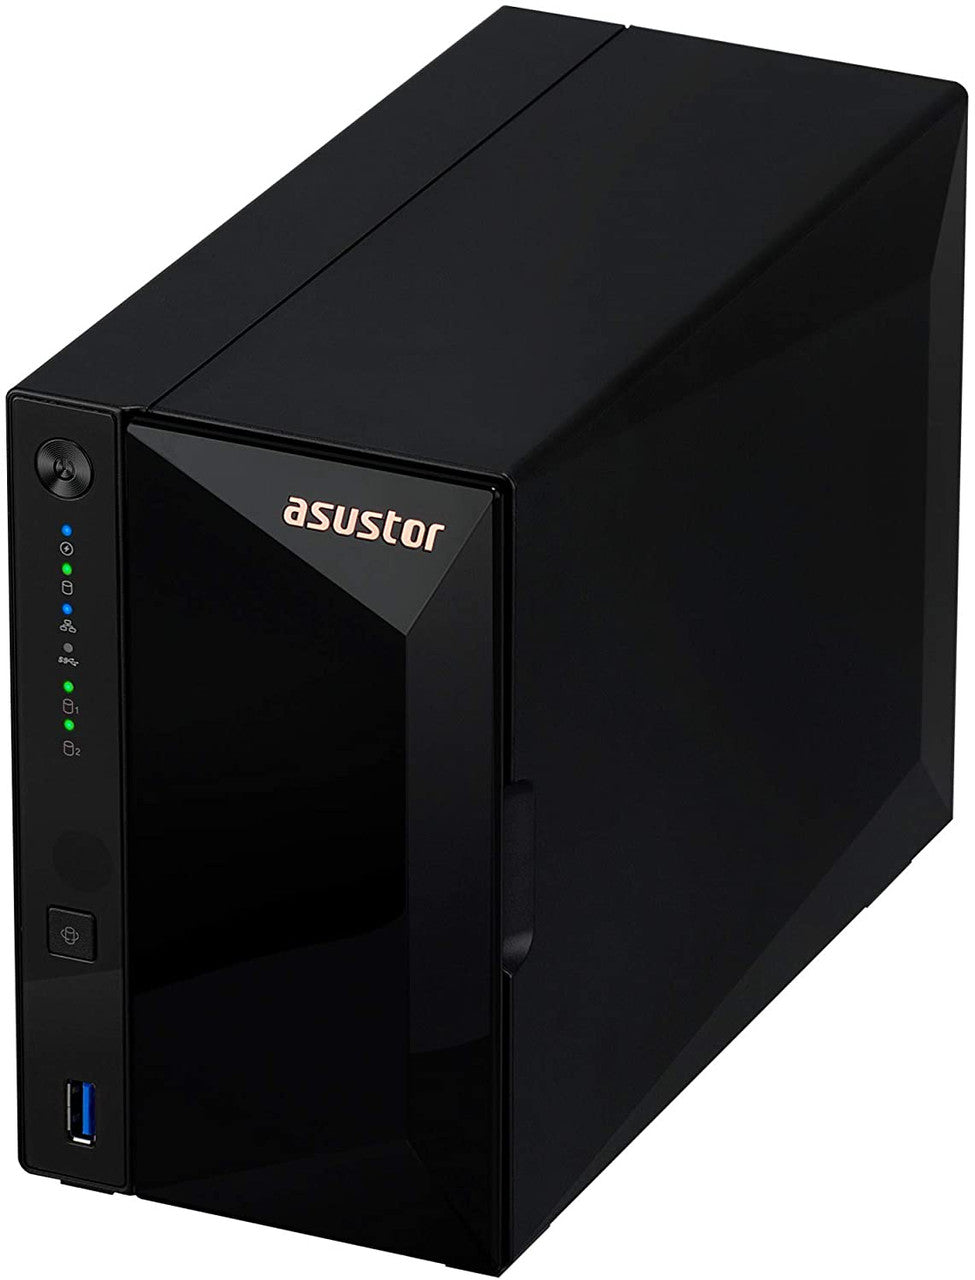 Asustor AS3302T 2-Bay Drivestor 2 PRO NAS with 2GB RAM and 4TB (2x2TB) Western Digital RED Plus Drives Fully Assembled and Tested